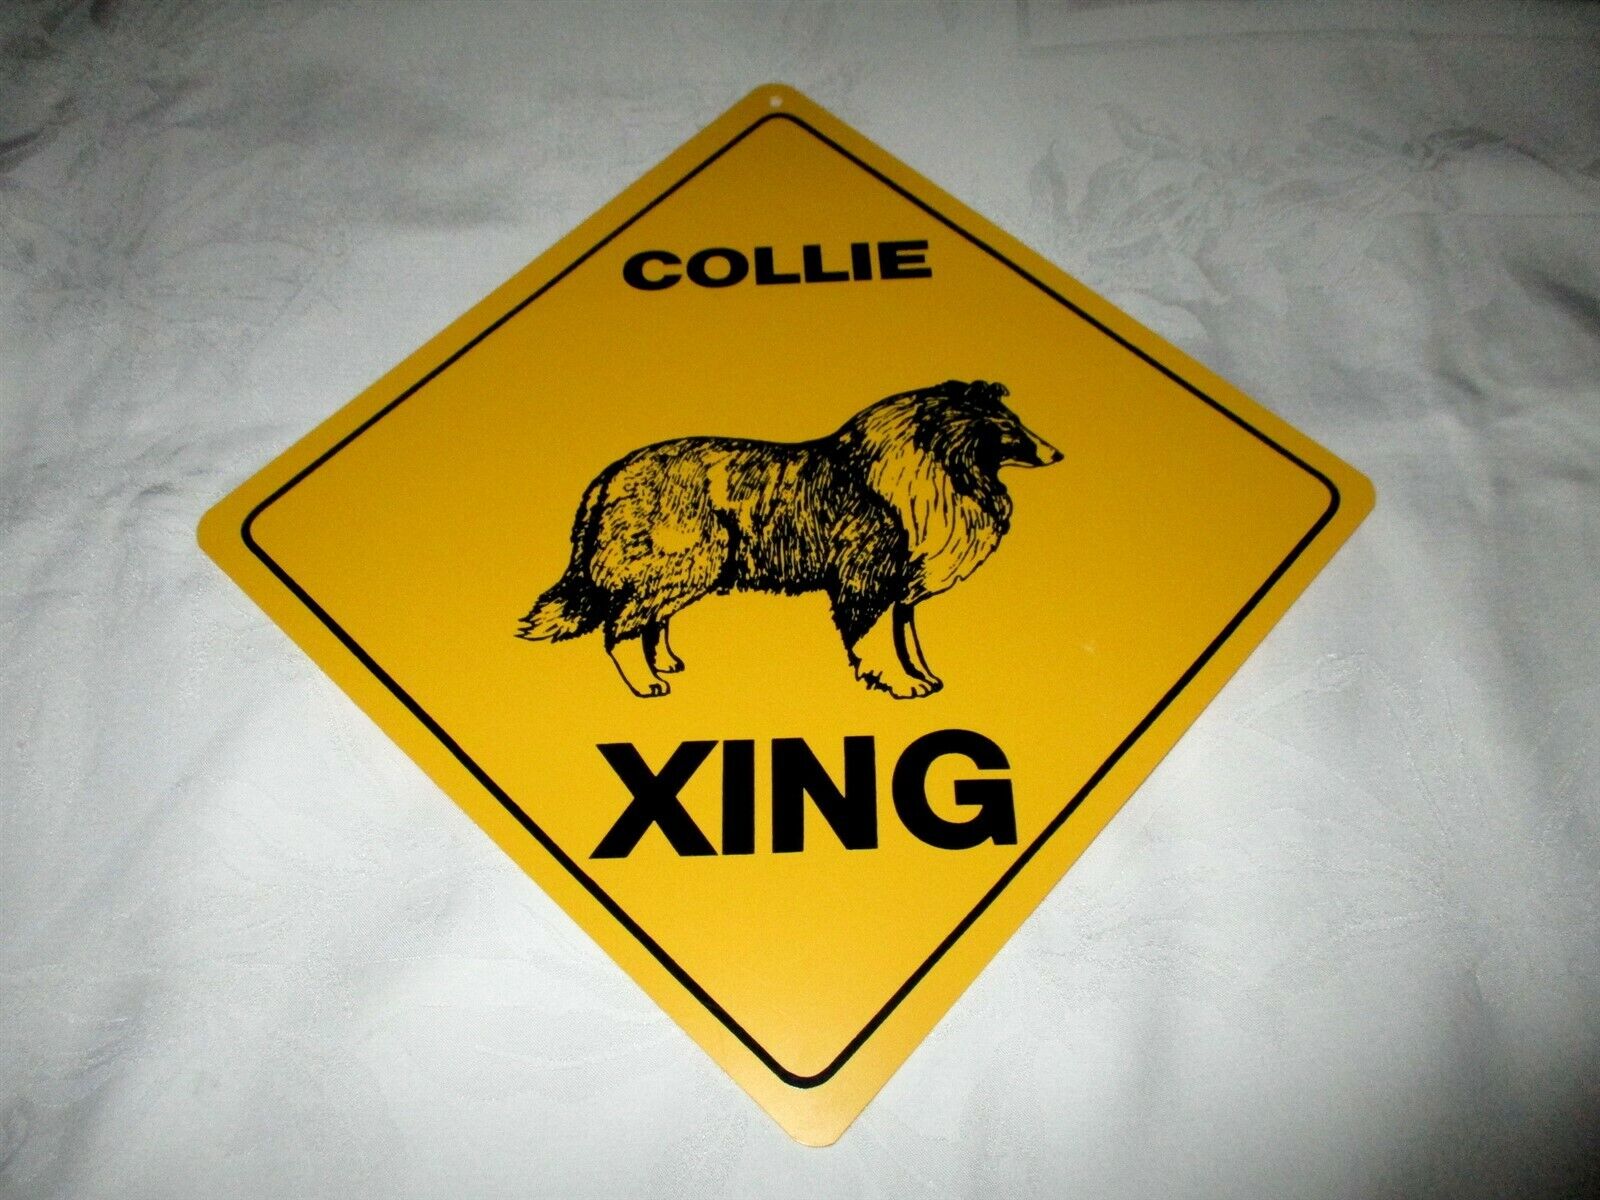 **COLLIE CROSSING XING SIGN #010 SALE - NEW**